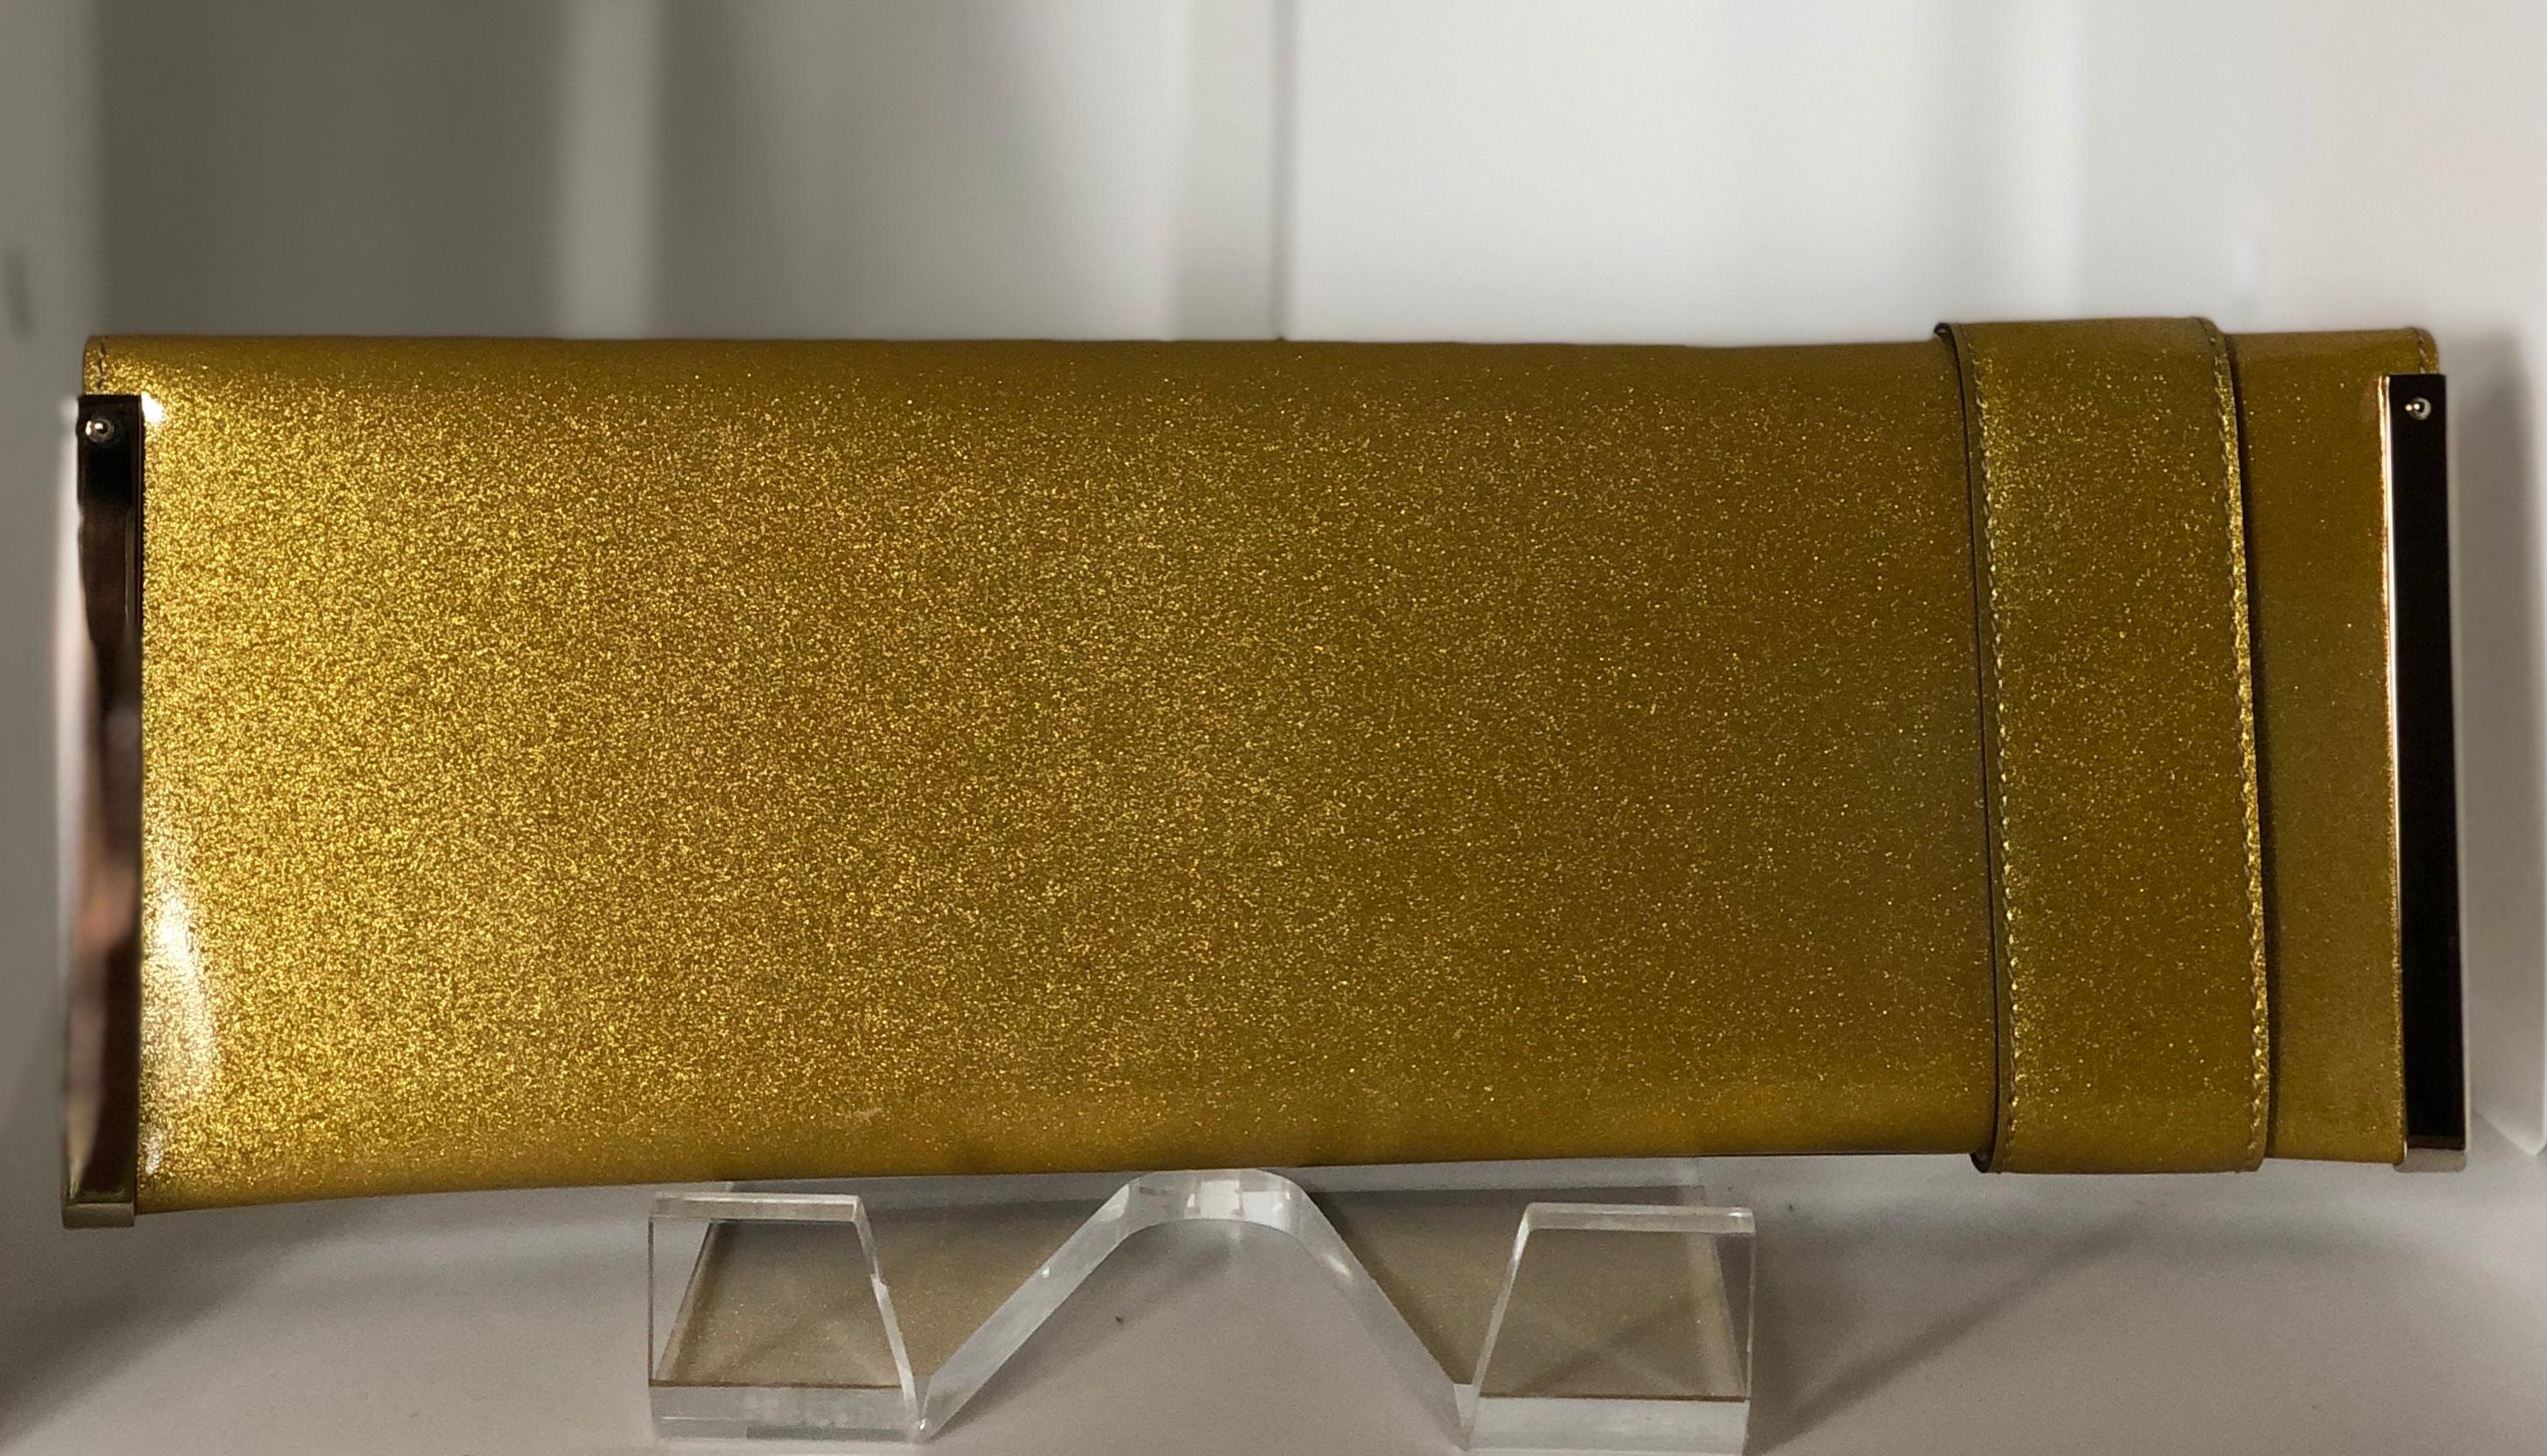 Gucci Iridescent Gold Patent Leather Elongated Clutch with Gold Metal Accents For Sale 1